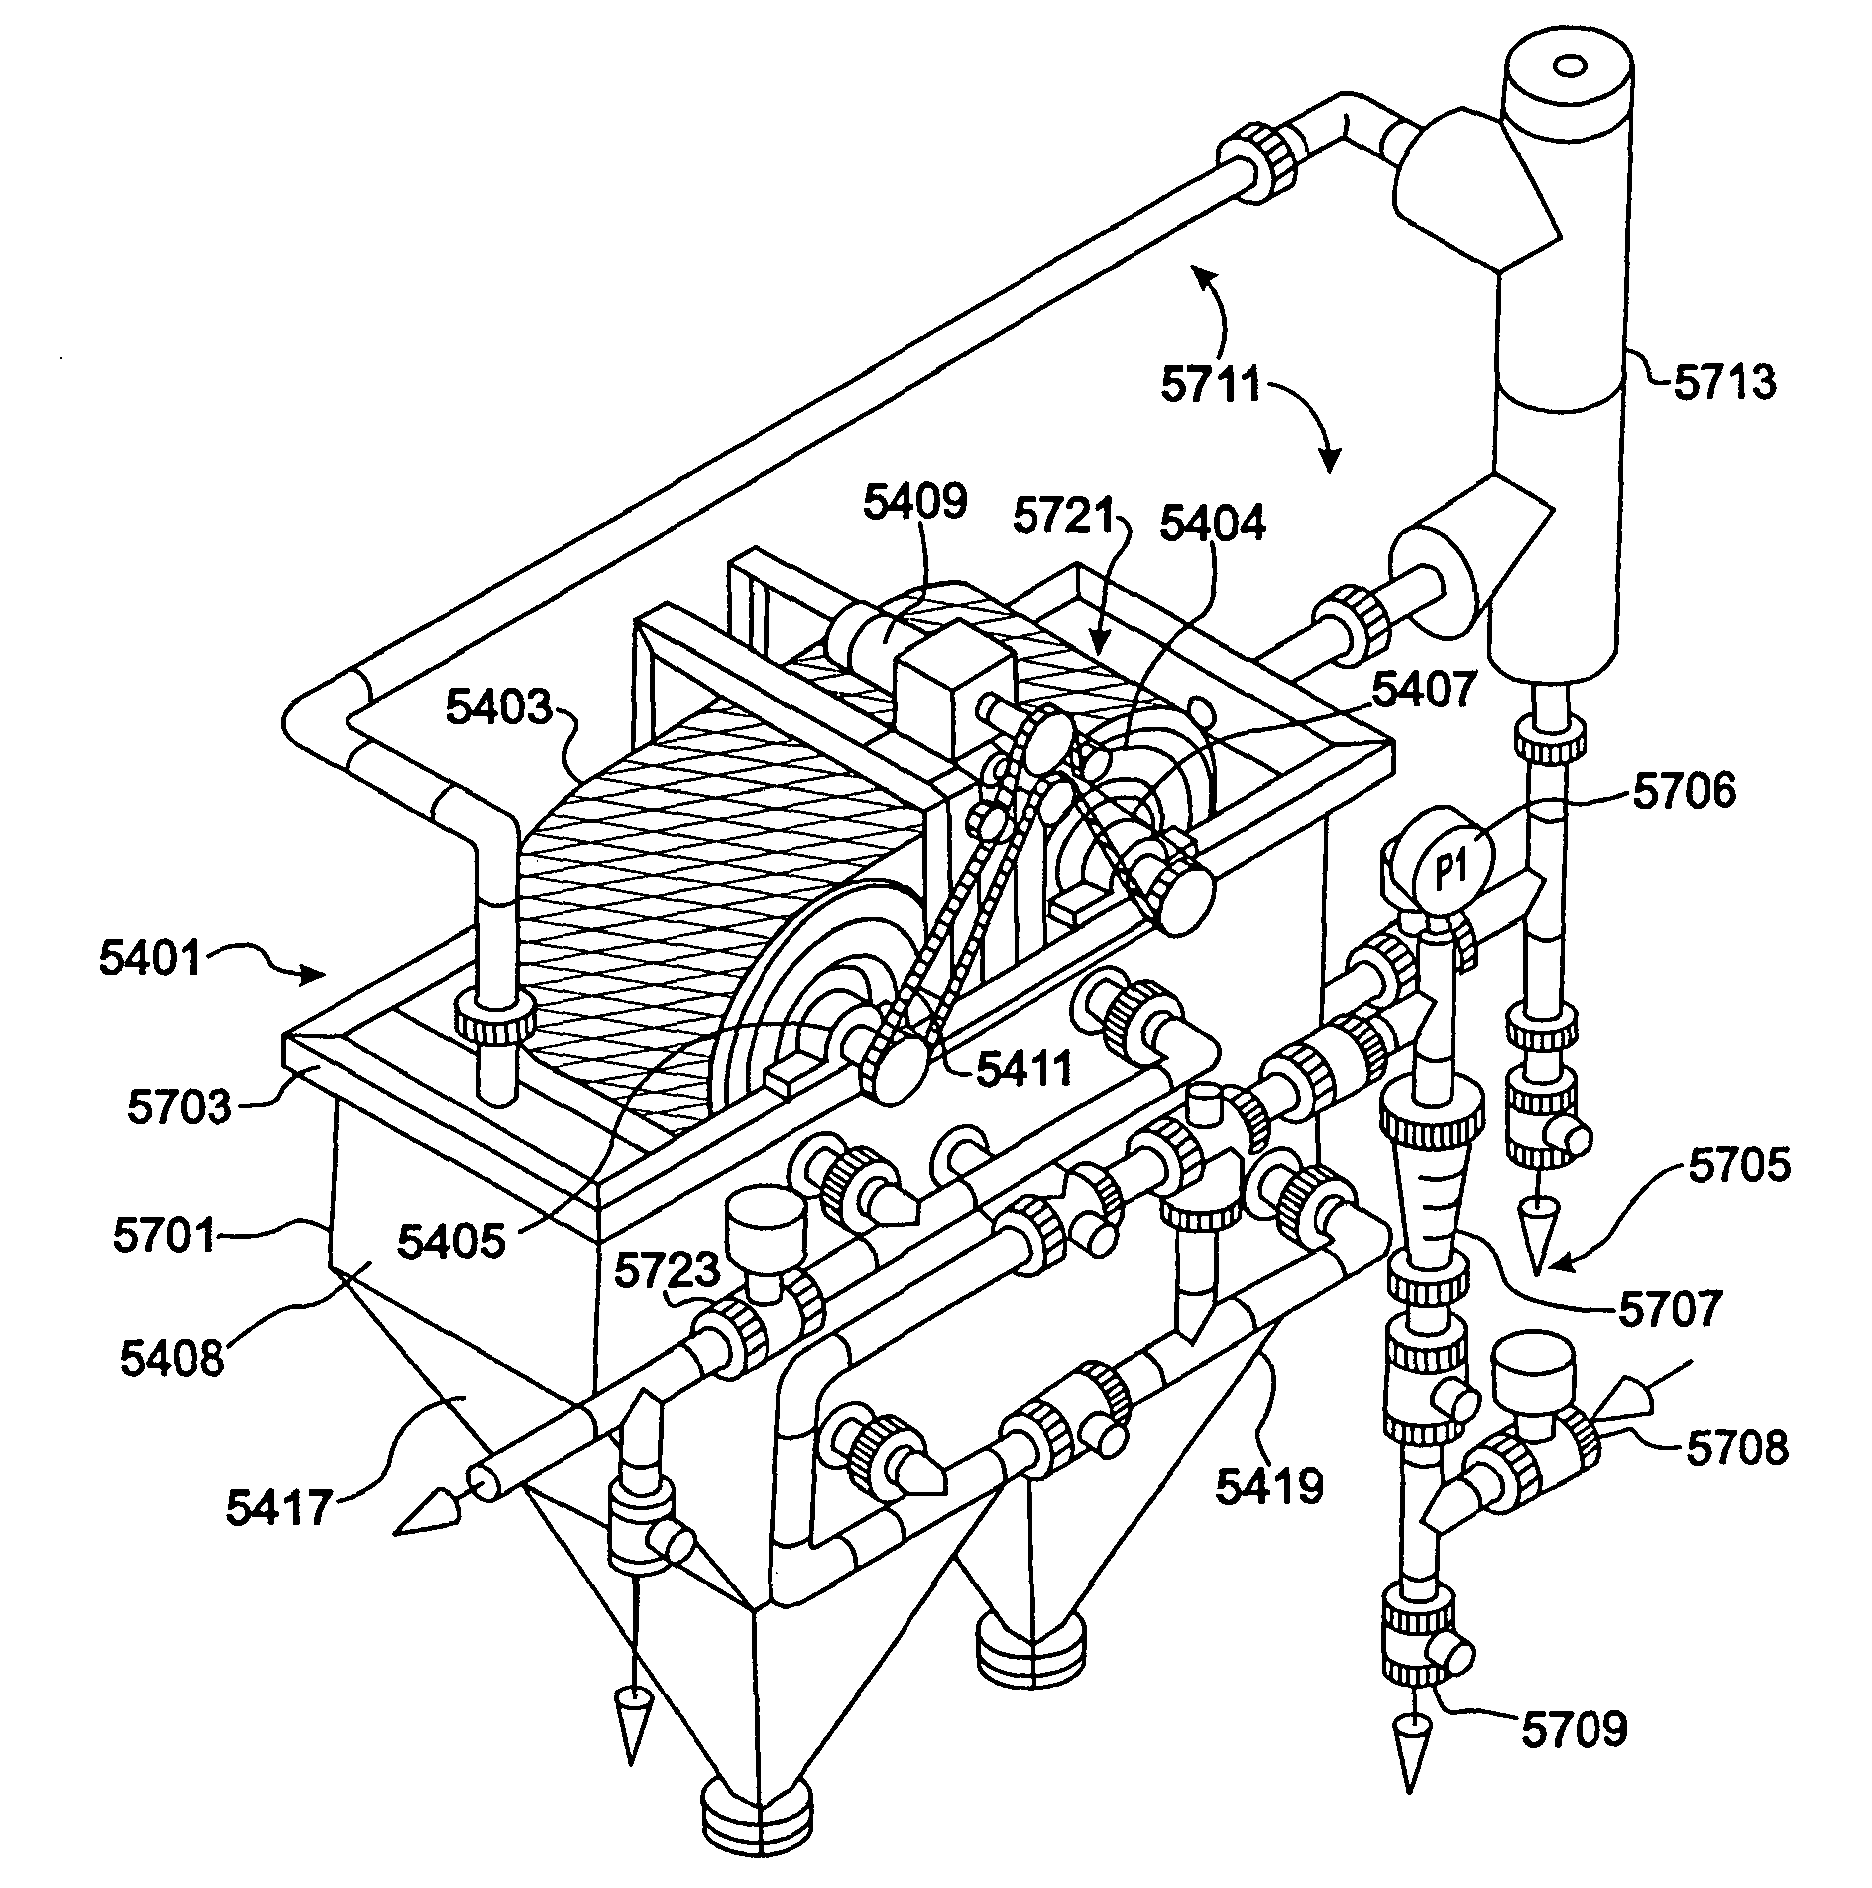 Biological wastewater treatment apparatus and methods using moving belt contractor